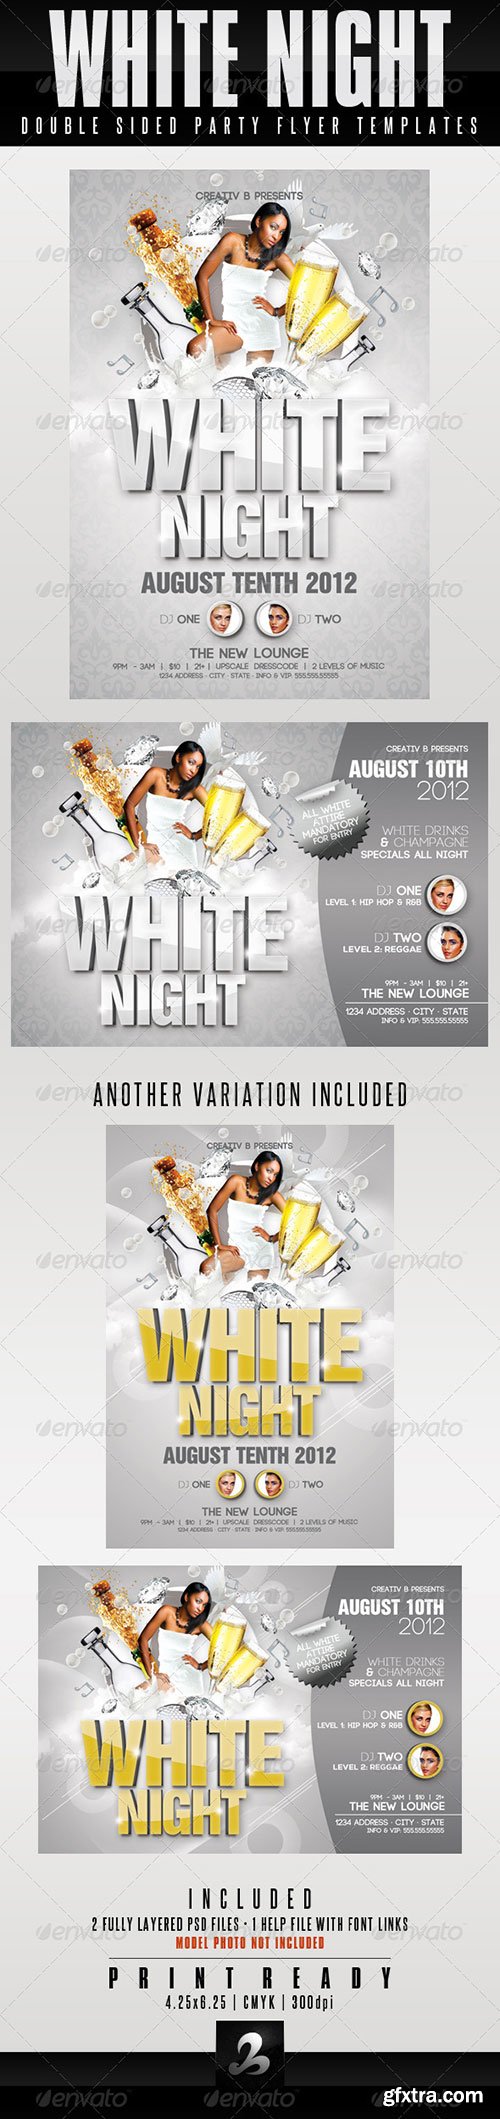 GraphicRiver - White Night Party Flyer Templates